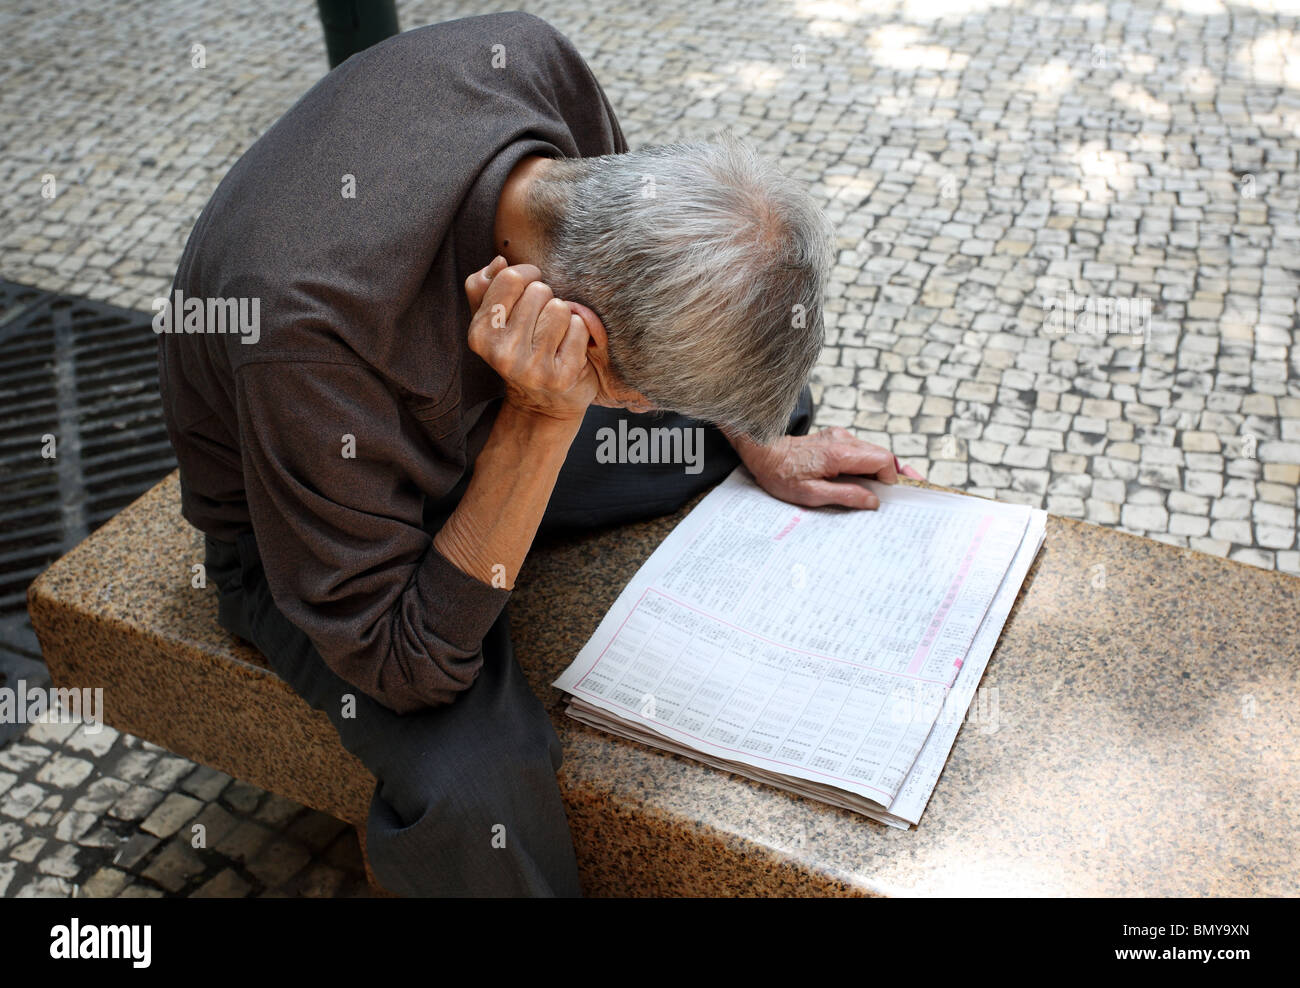 A man reading a newspaper, Macao, China Stock Photo